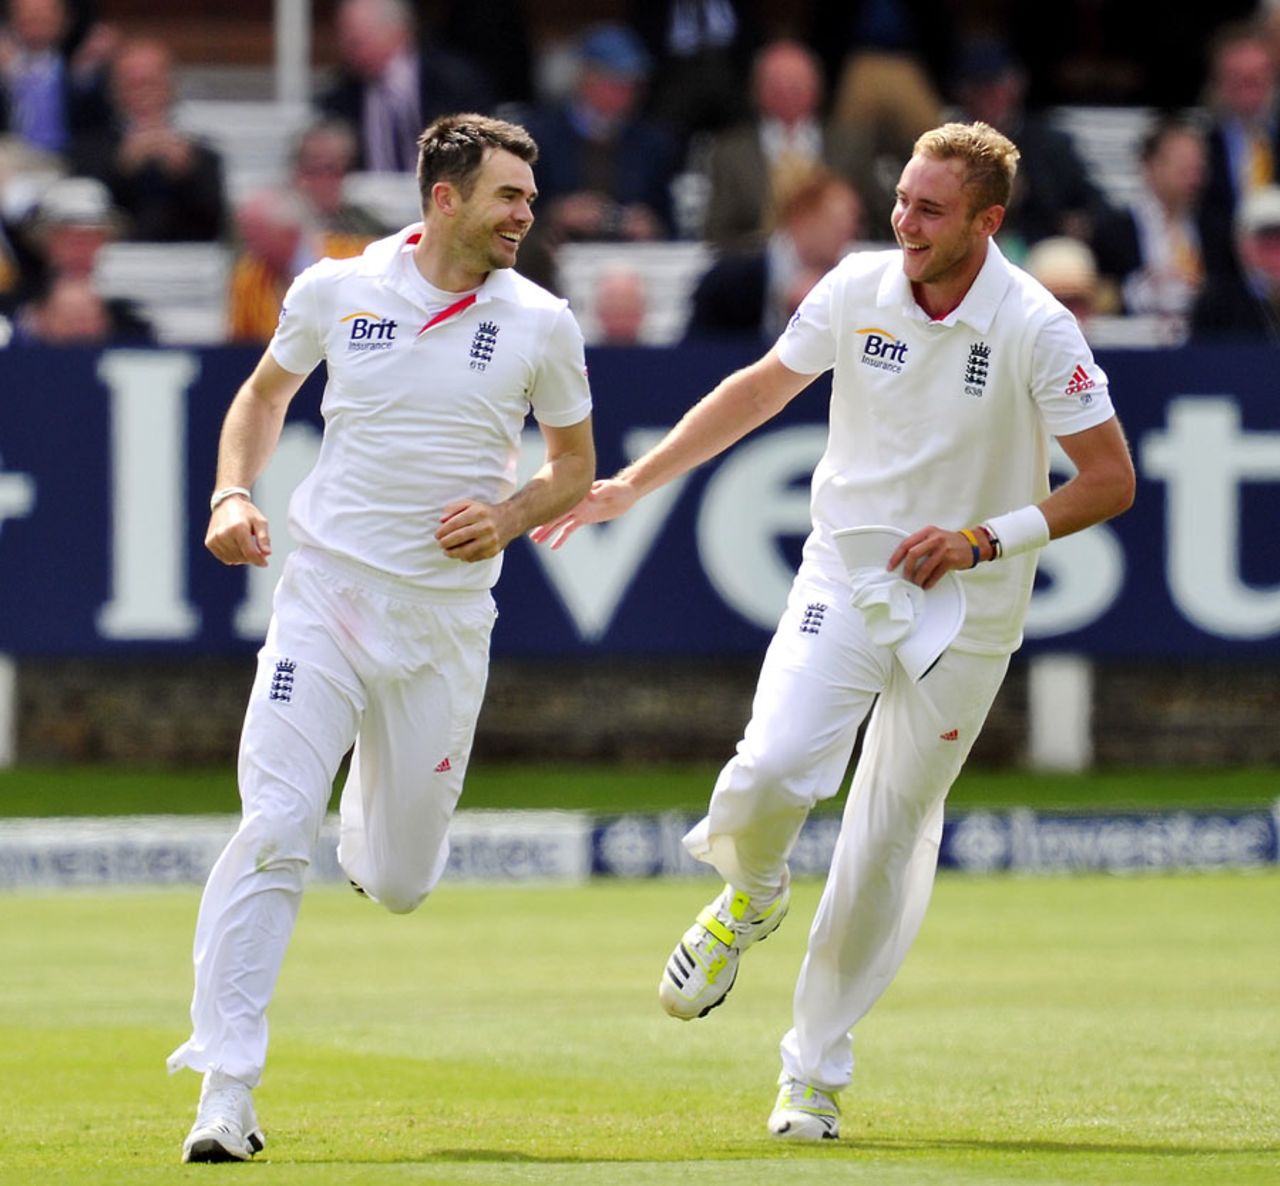 James Anderson and Stuart Broad have often been all England needed, England v New Zealand, 1st Investec Test, Lord's, 4th day, May 19, 2013